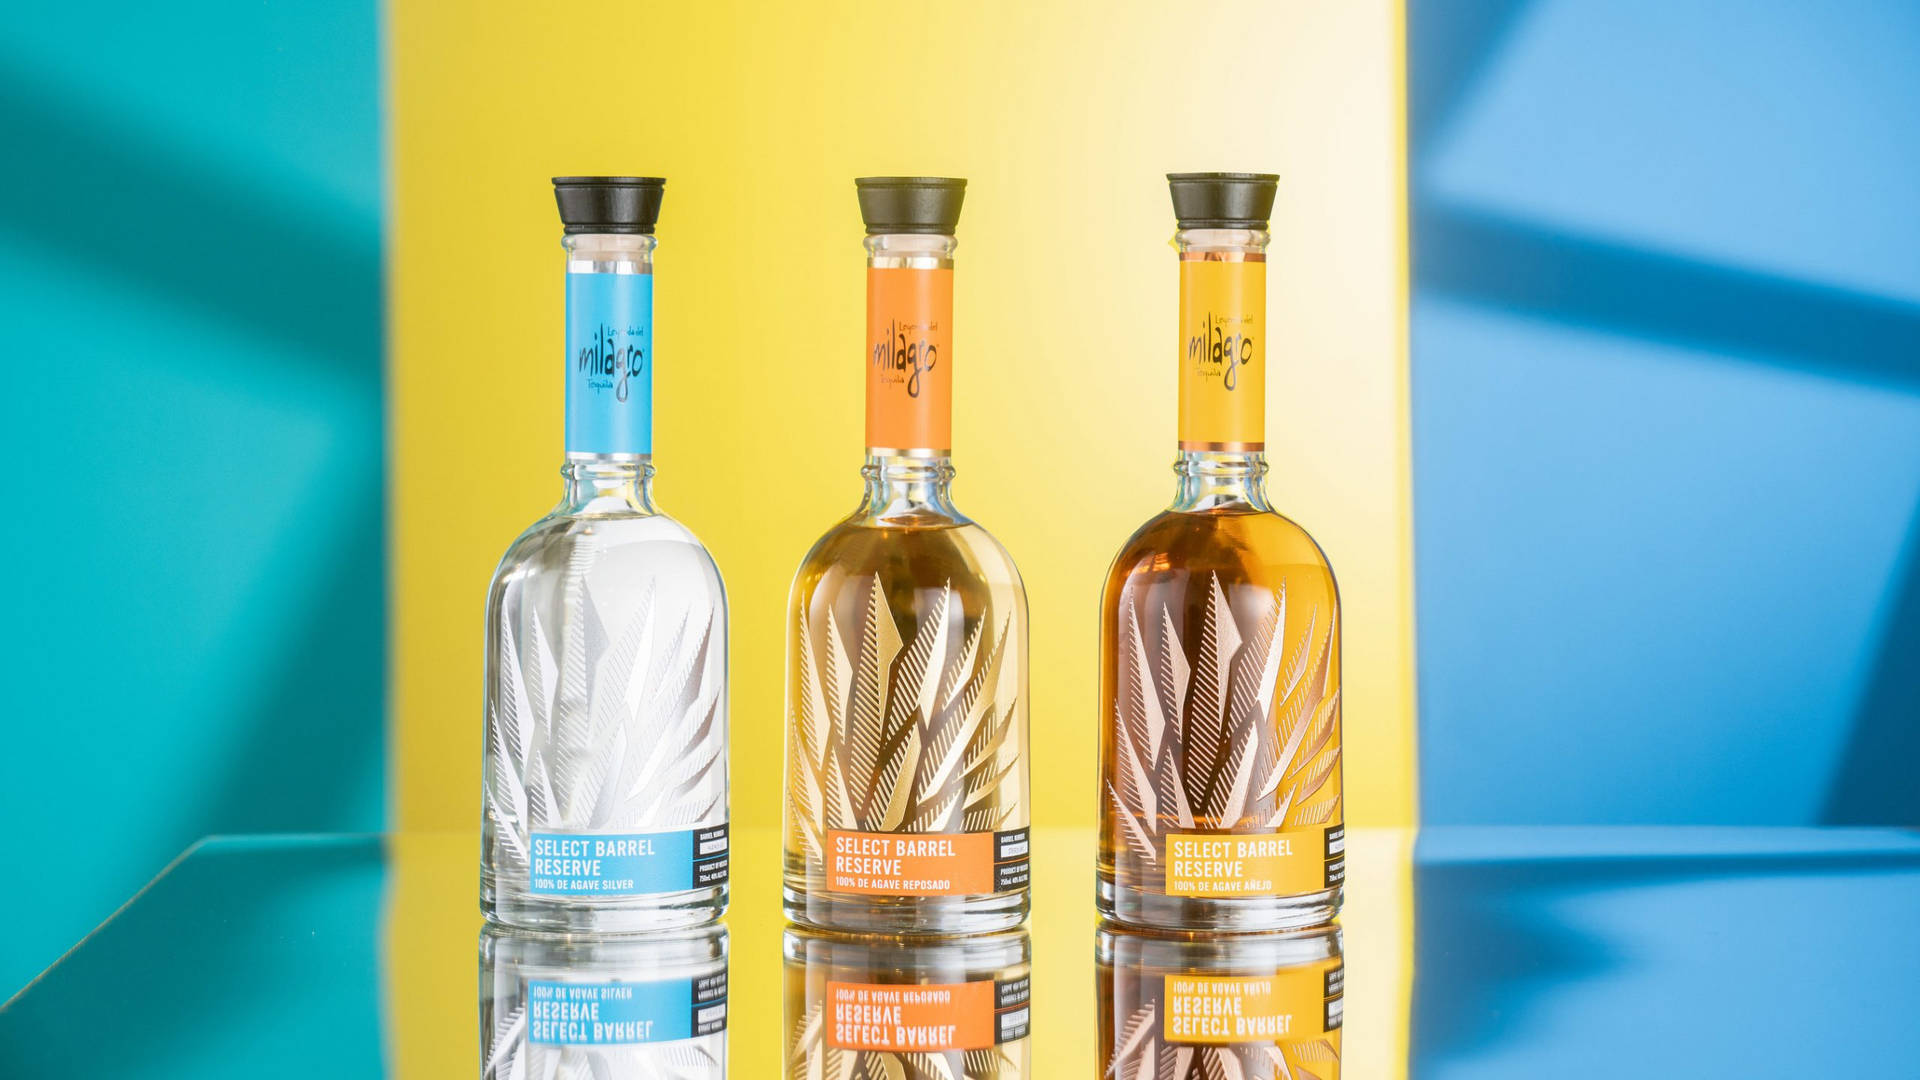 Milagro Select Tequilas Colorful Photoshoot Wallpaper